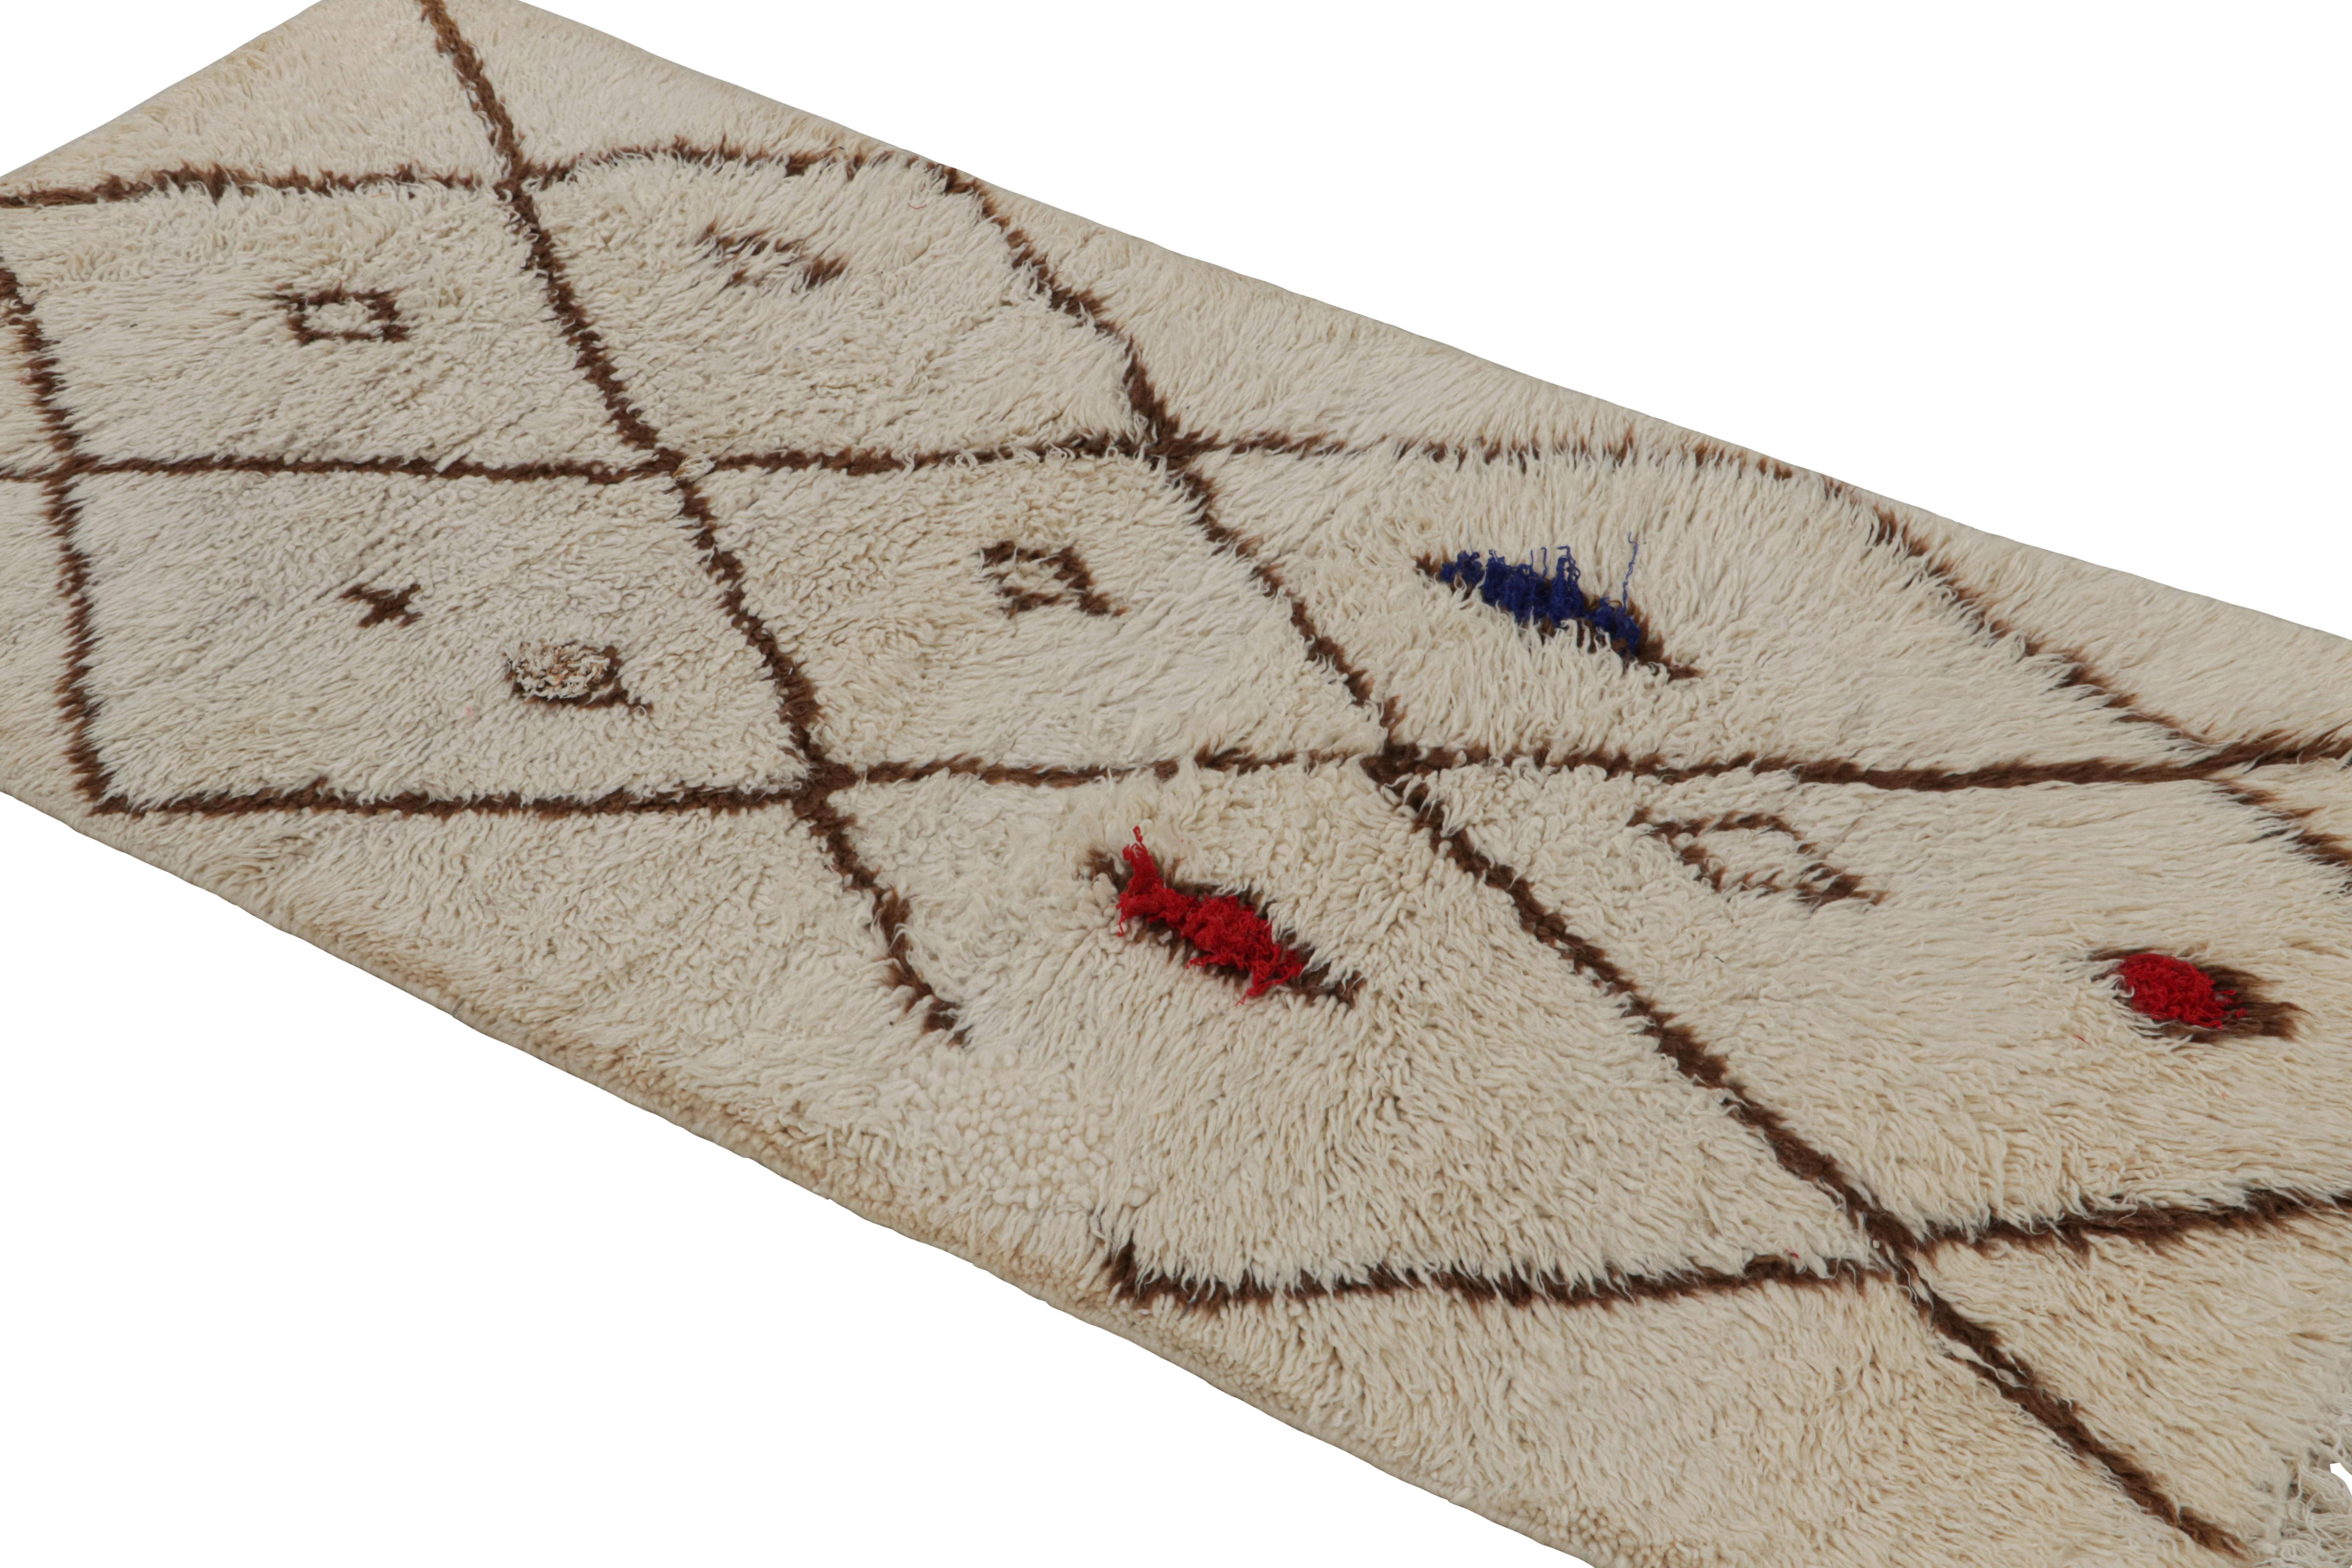 Hand-knotted in wool circa 1950-1960, this vintage 3x6 Moroccan runner is believed to hail from the Azilal tribe. 

On the Design: 

This runner enjoys beige-brown diamond patterns with red and blue punctuations. Keen eyes will further admire its